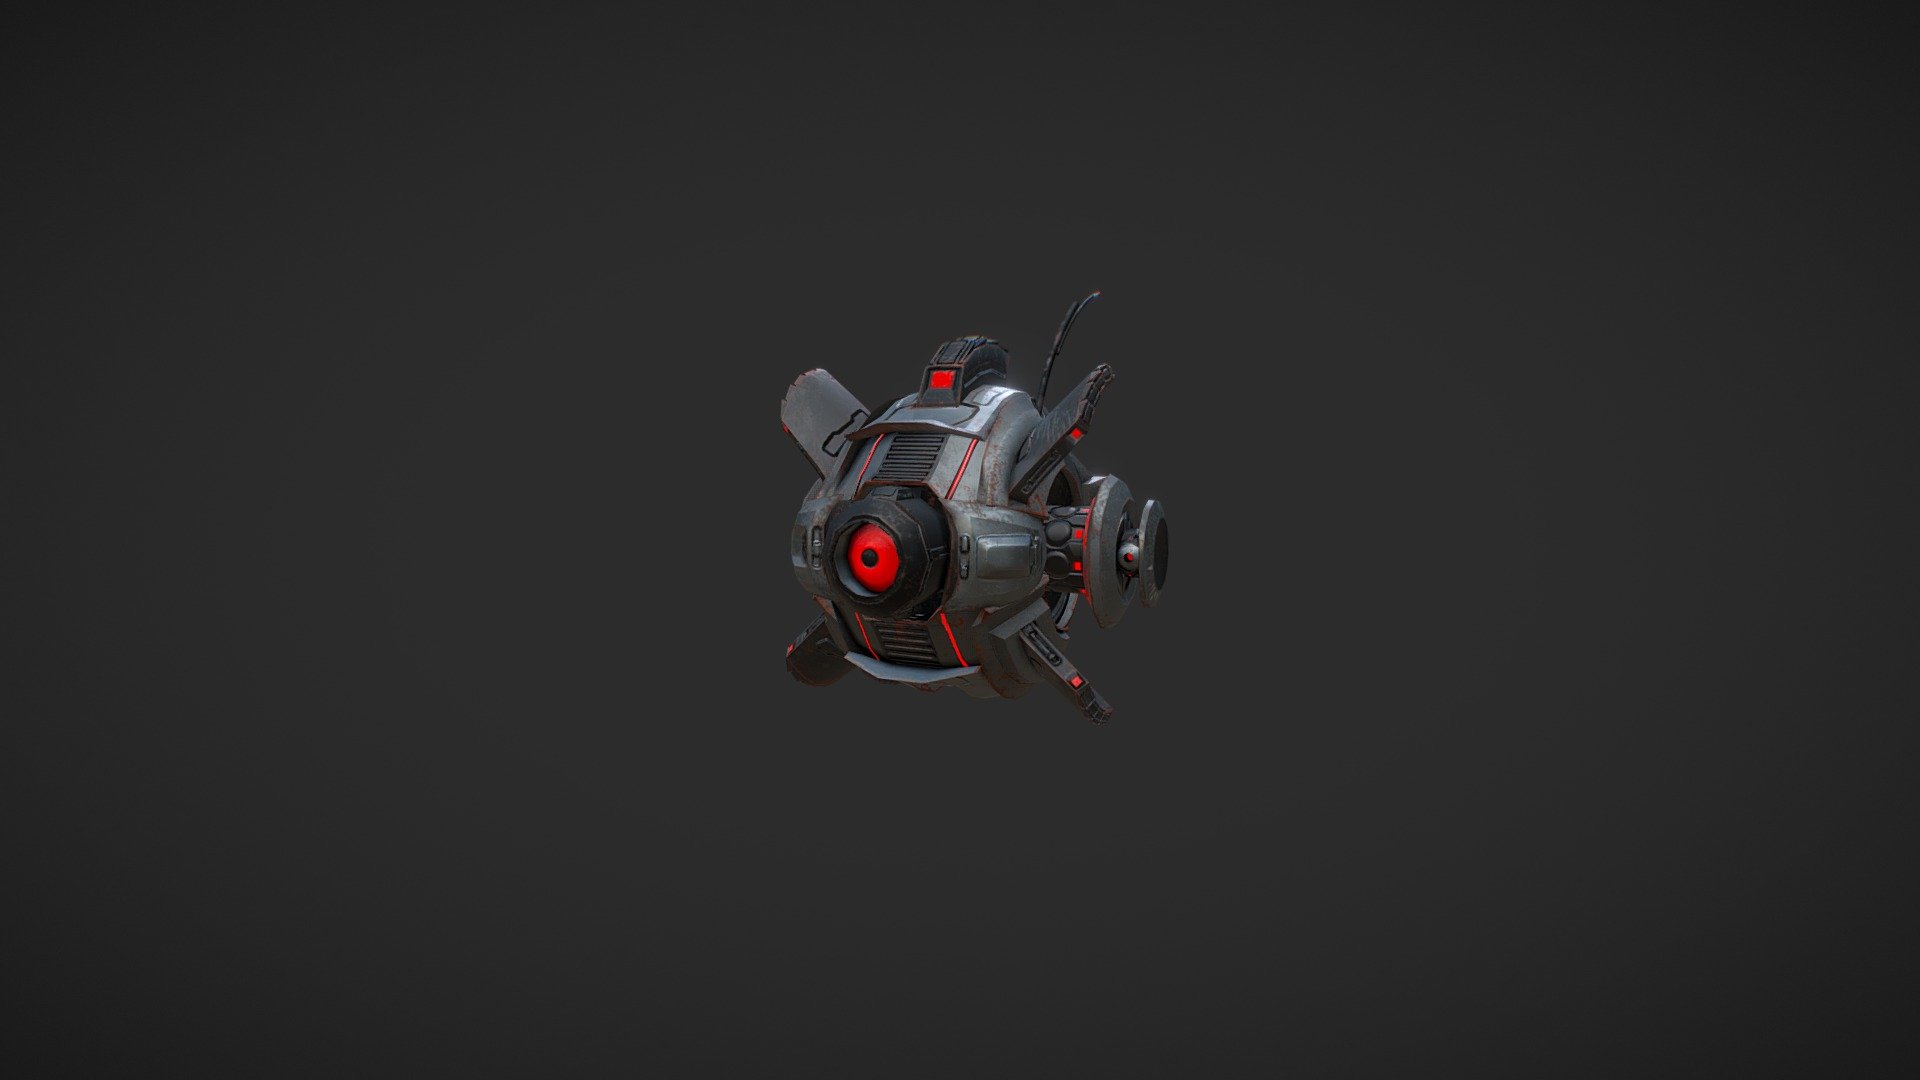 An enemy drone I made for a game prototype at Borealys Games. I made the modeling and the animations in 3ds Max and textures in Substance Painter 3d model